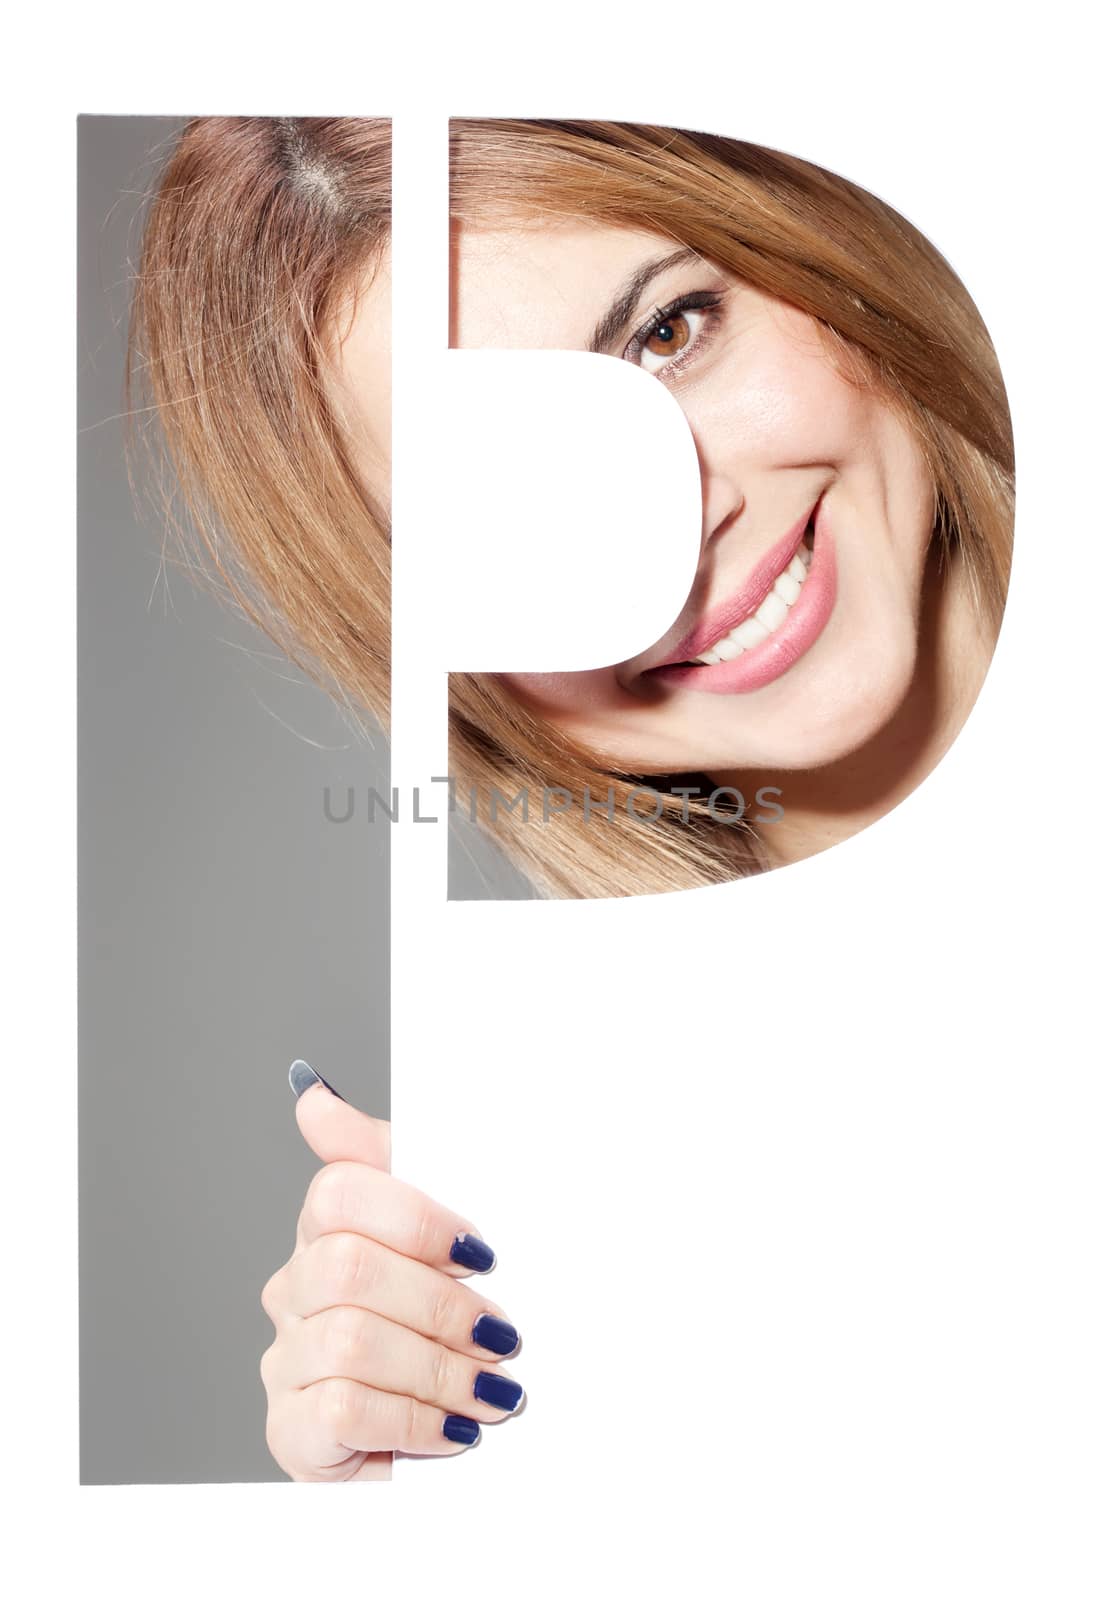 girl hiding behind and holding the letter "P"